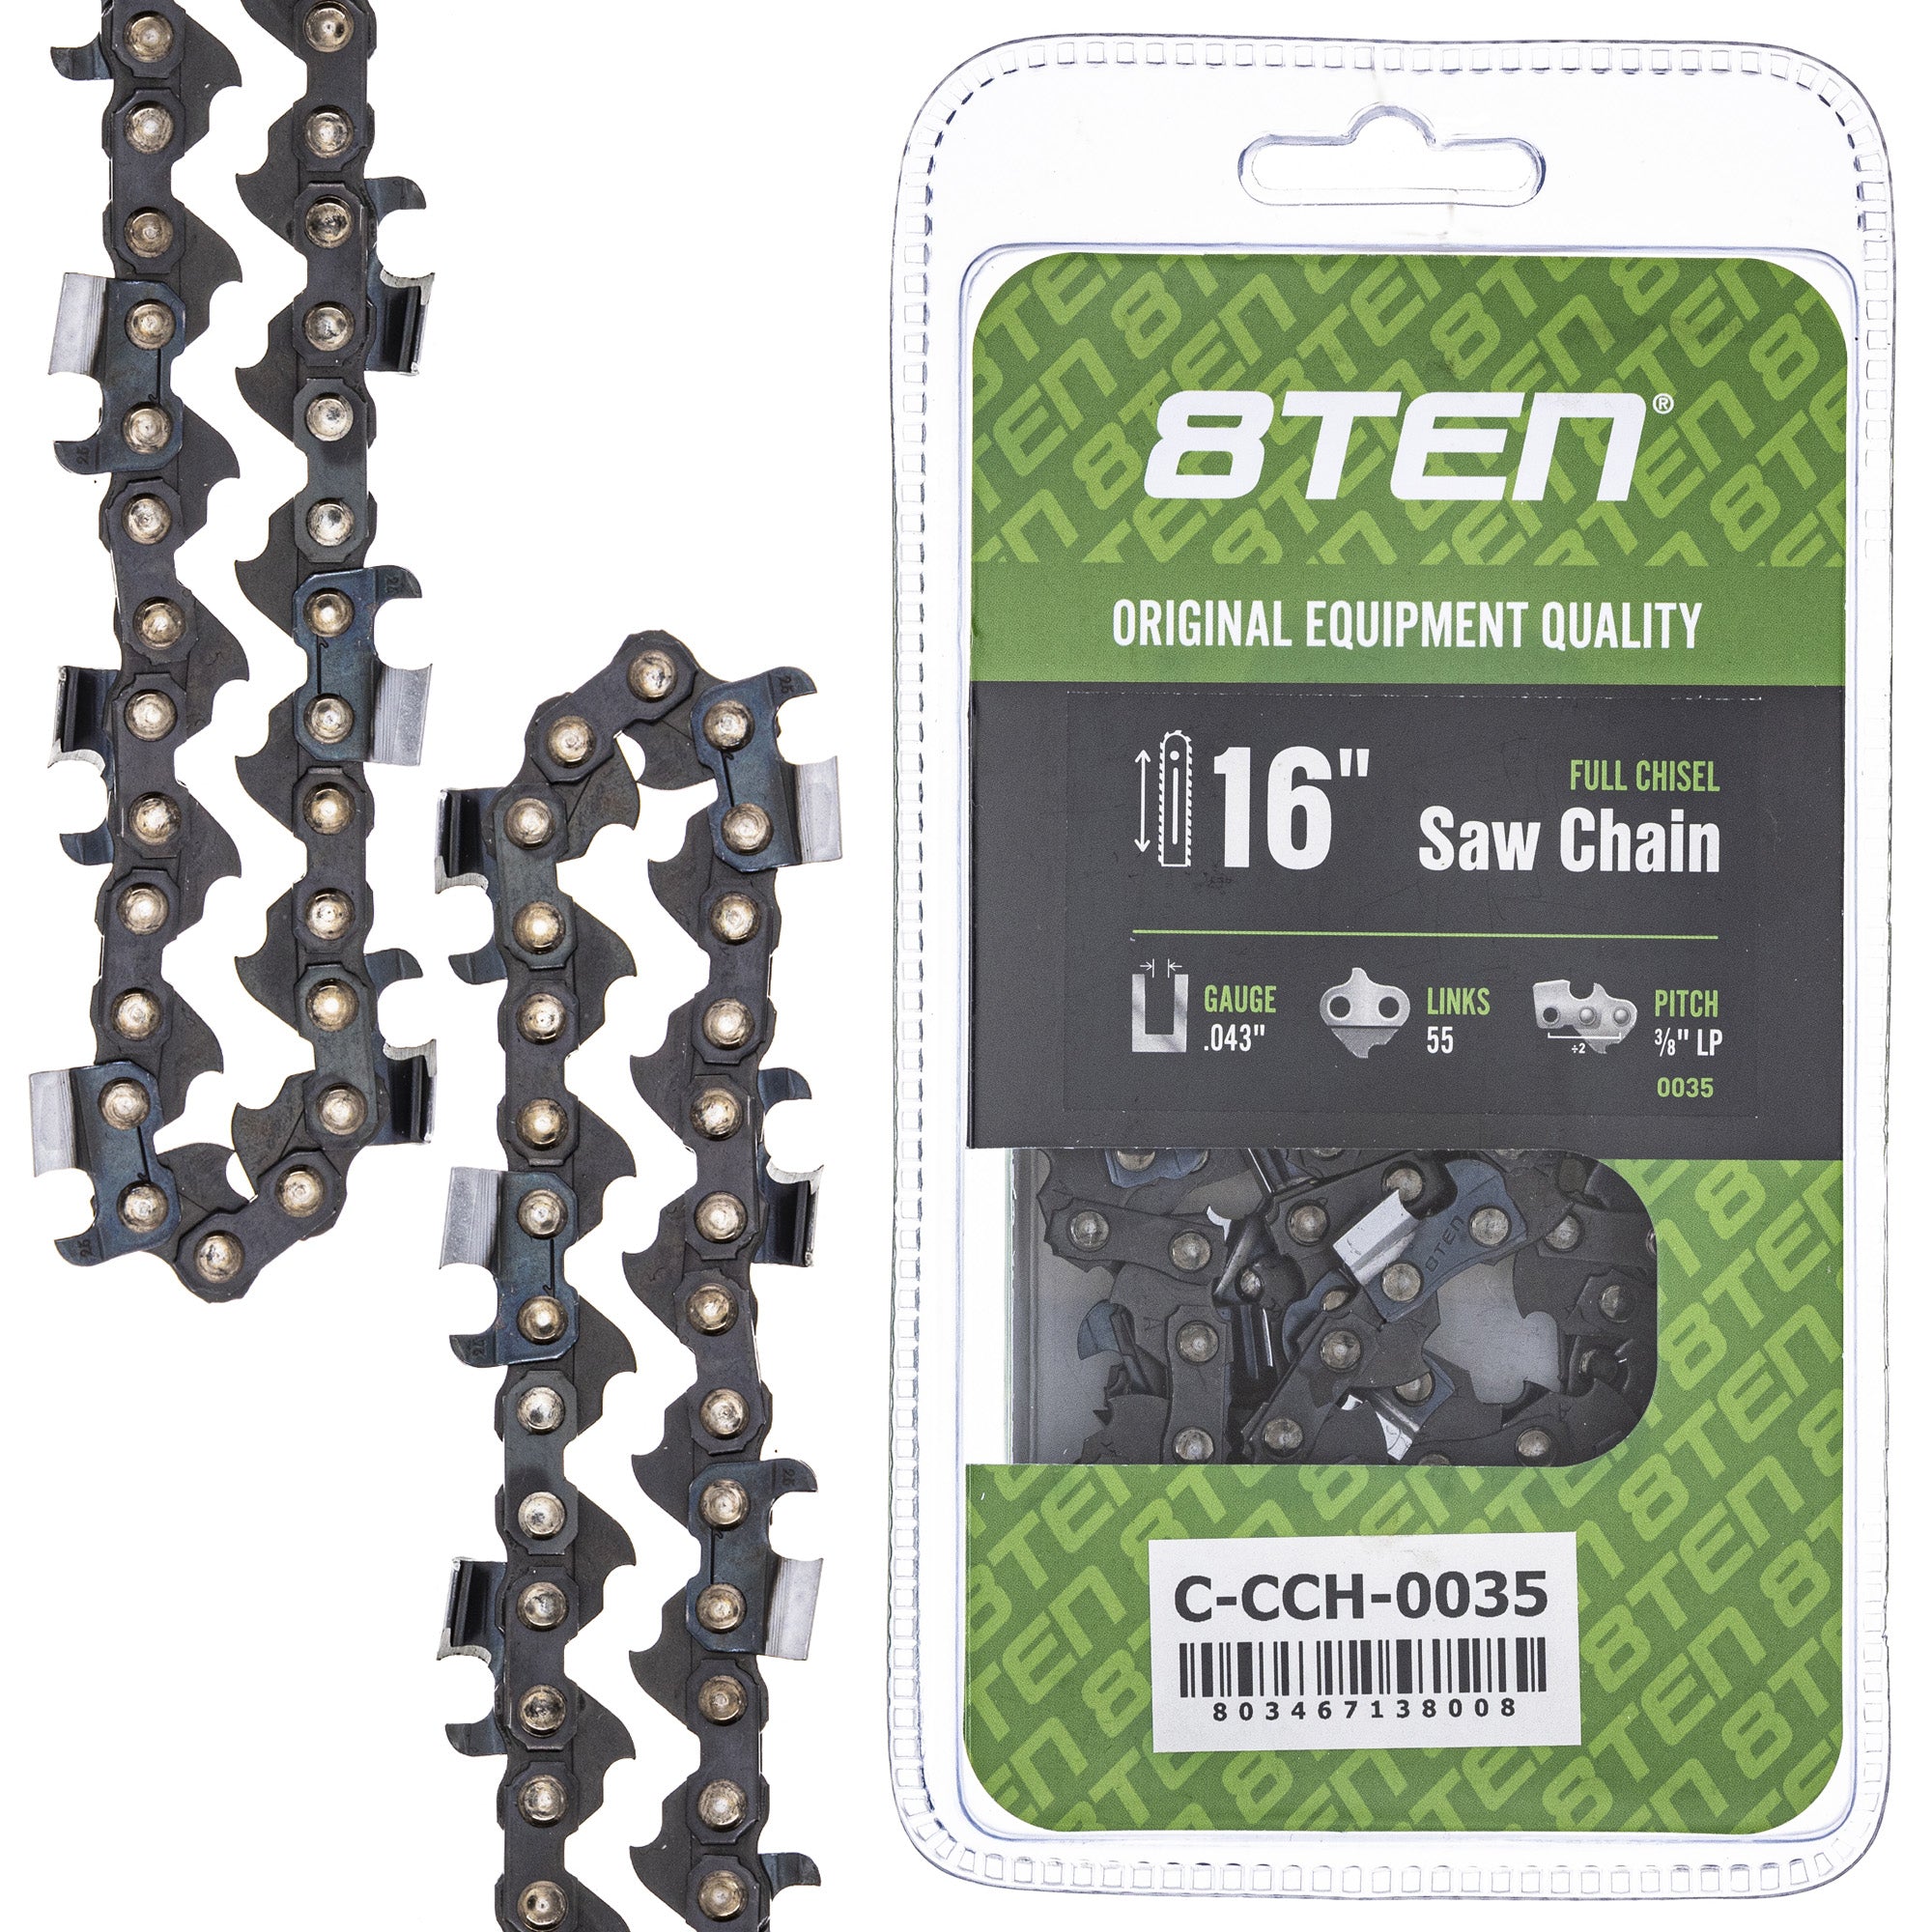 8TEN MK1010244 Guide Bar & Chain for MSE MS HT E